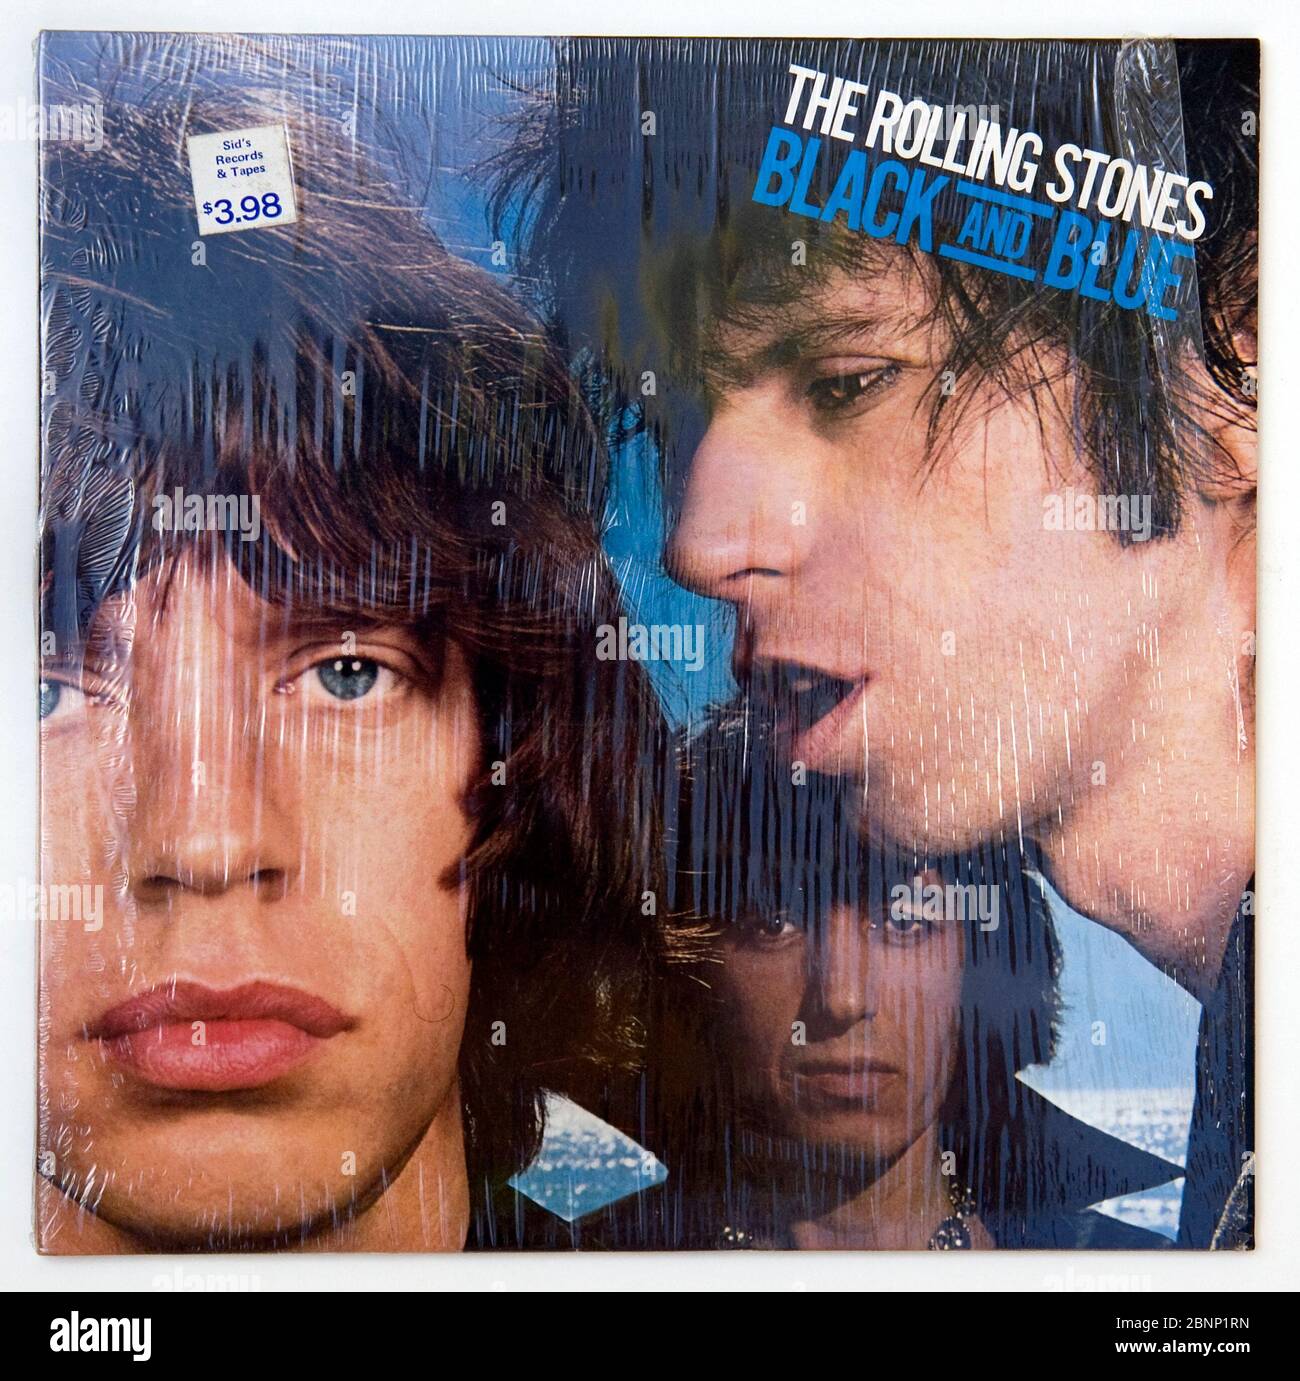 Rolling Stones Black and Blue Record Album Cover in plastic sleeve with price tag circa 1976. Stock Photo